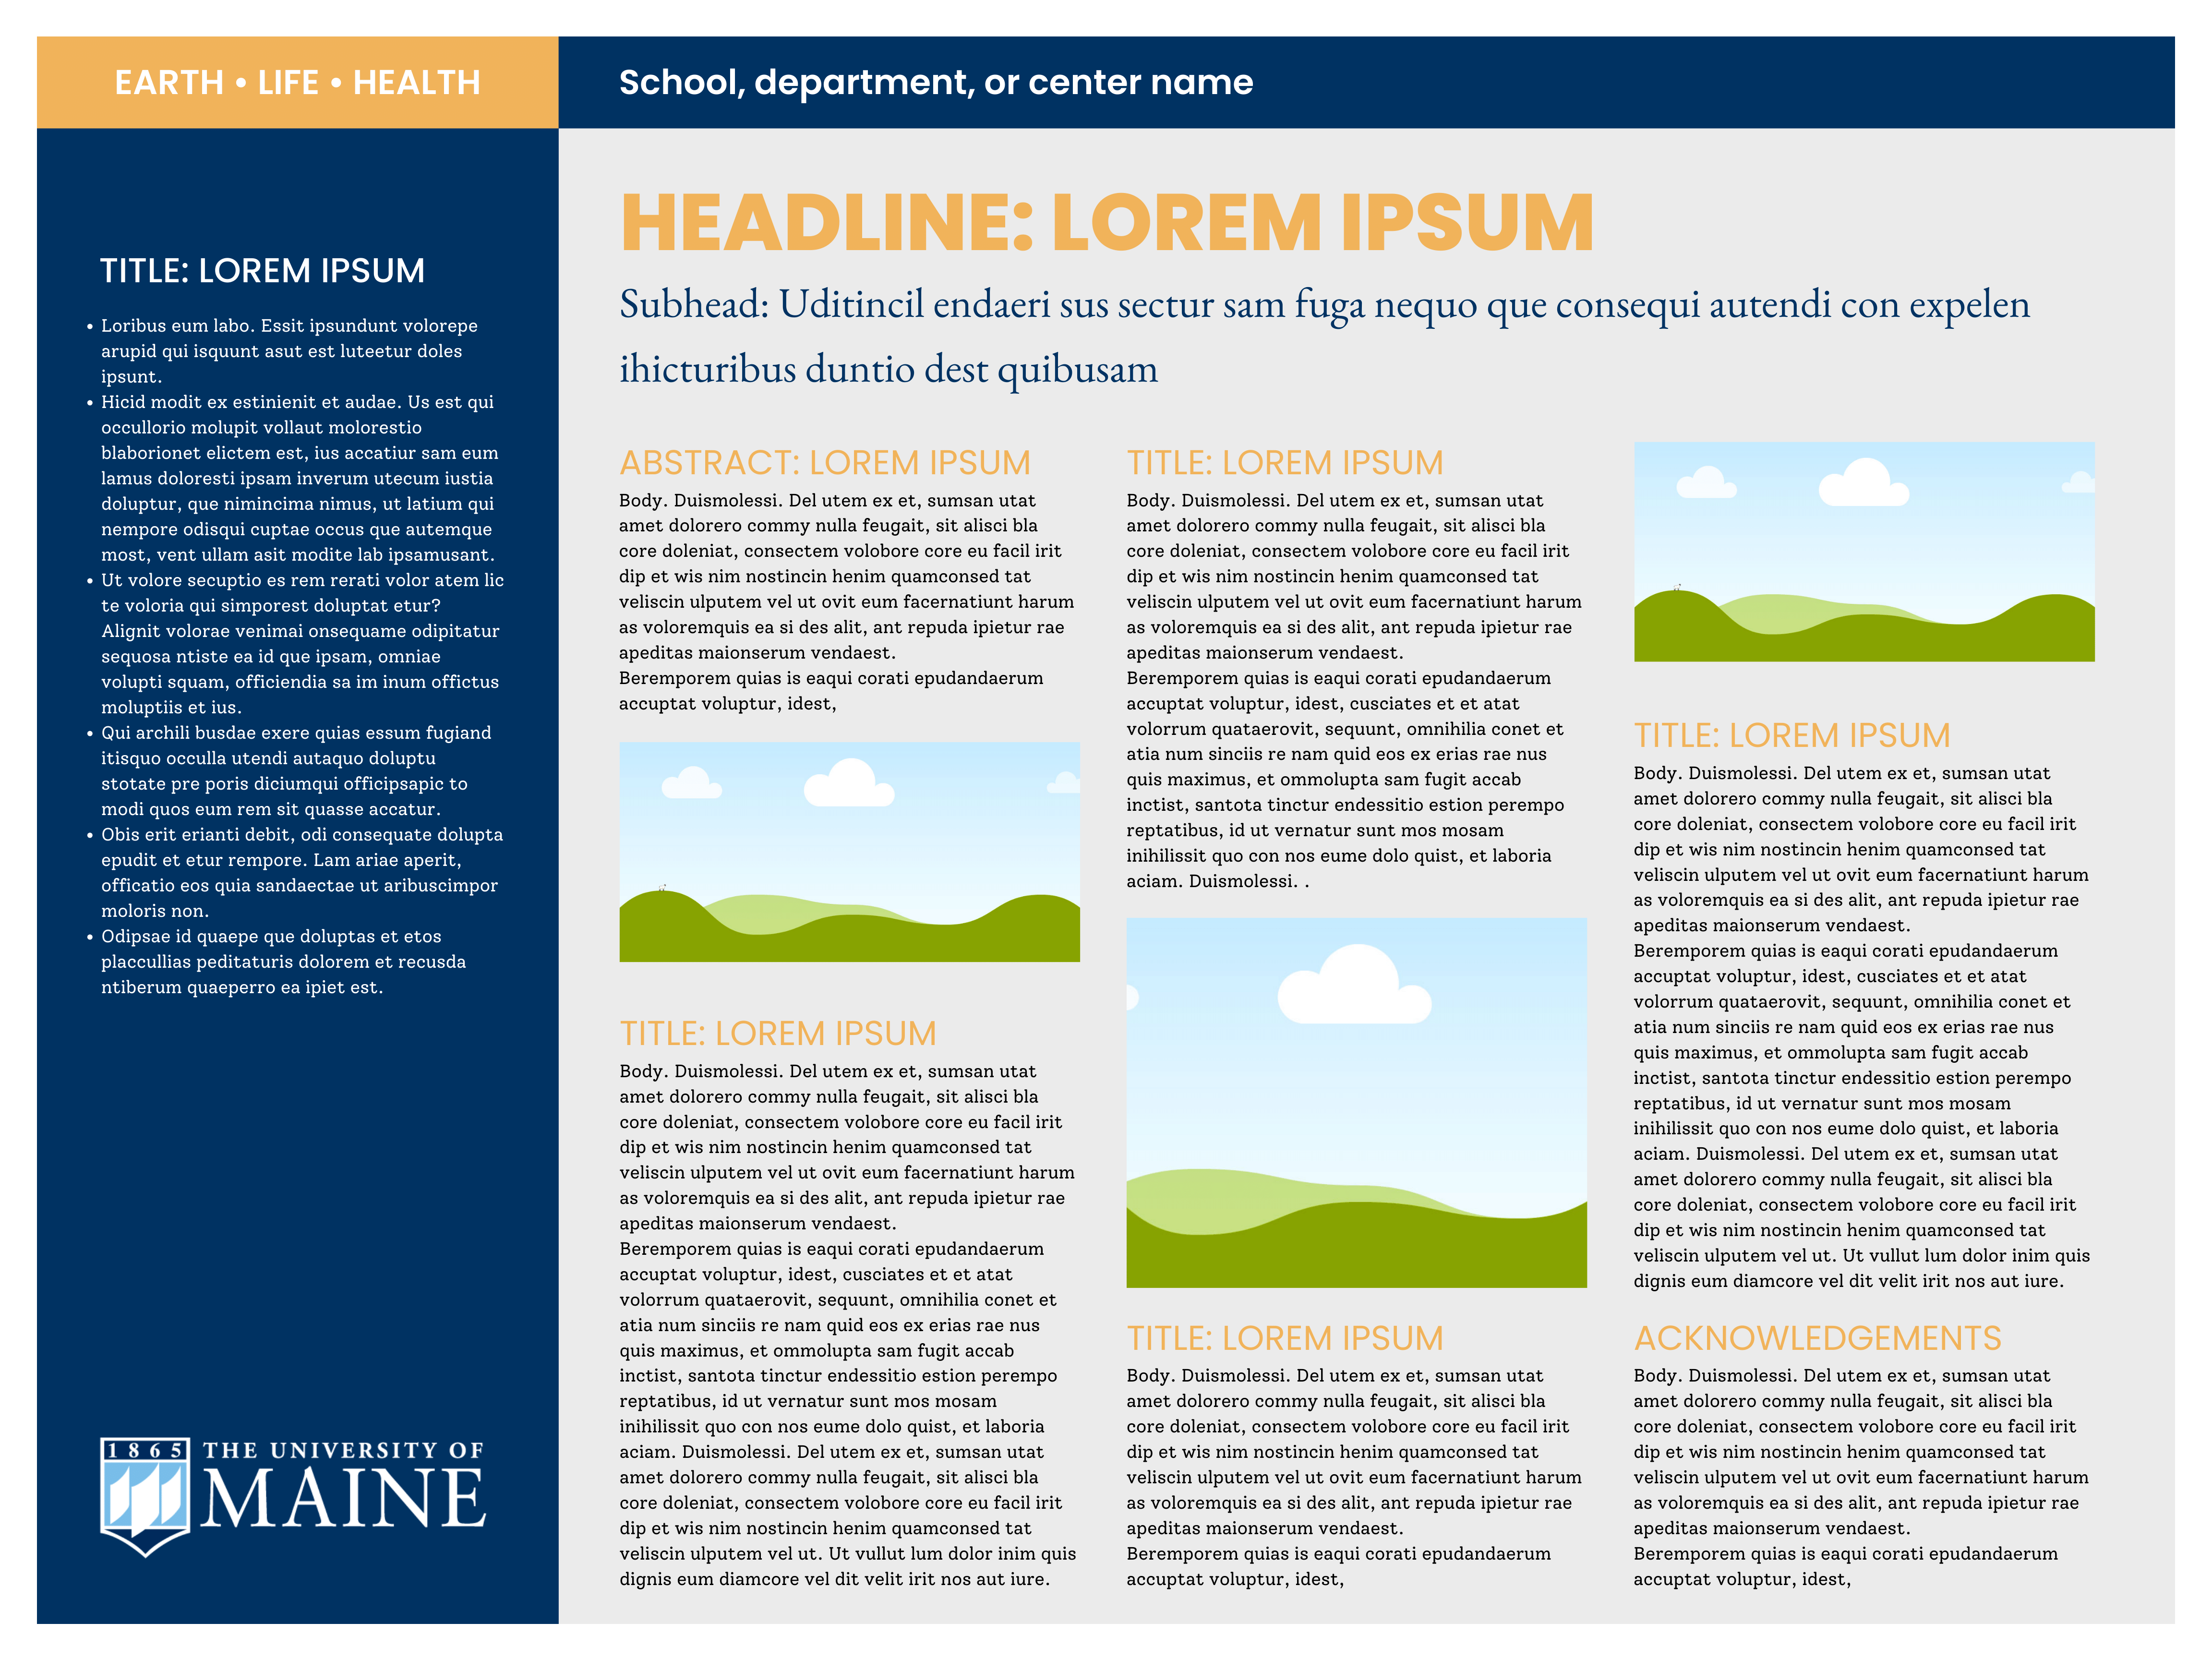 A research poster template with four columns and in a blue and gold color palette.